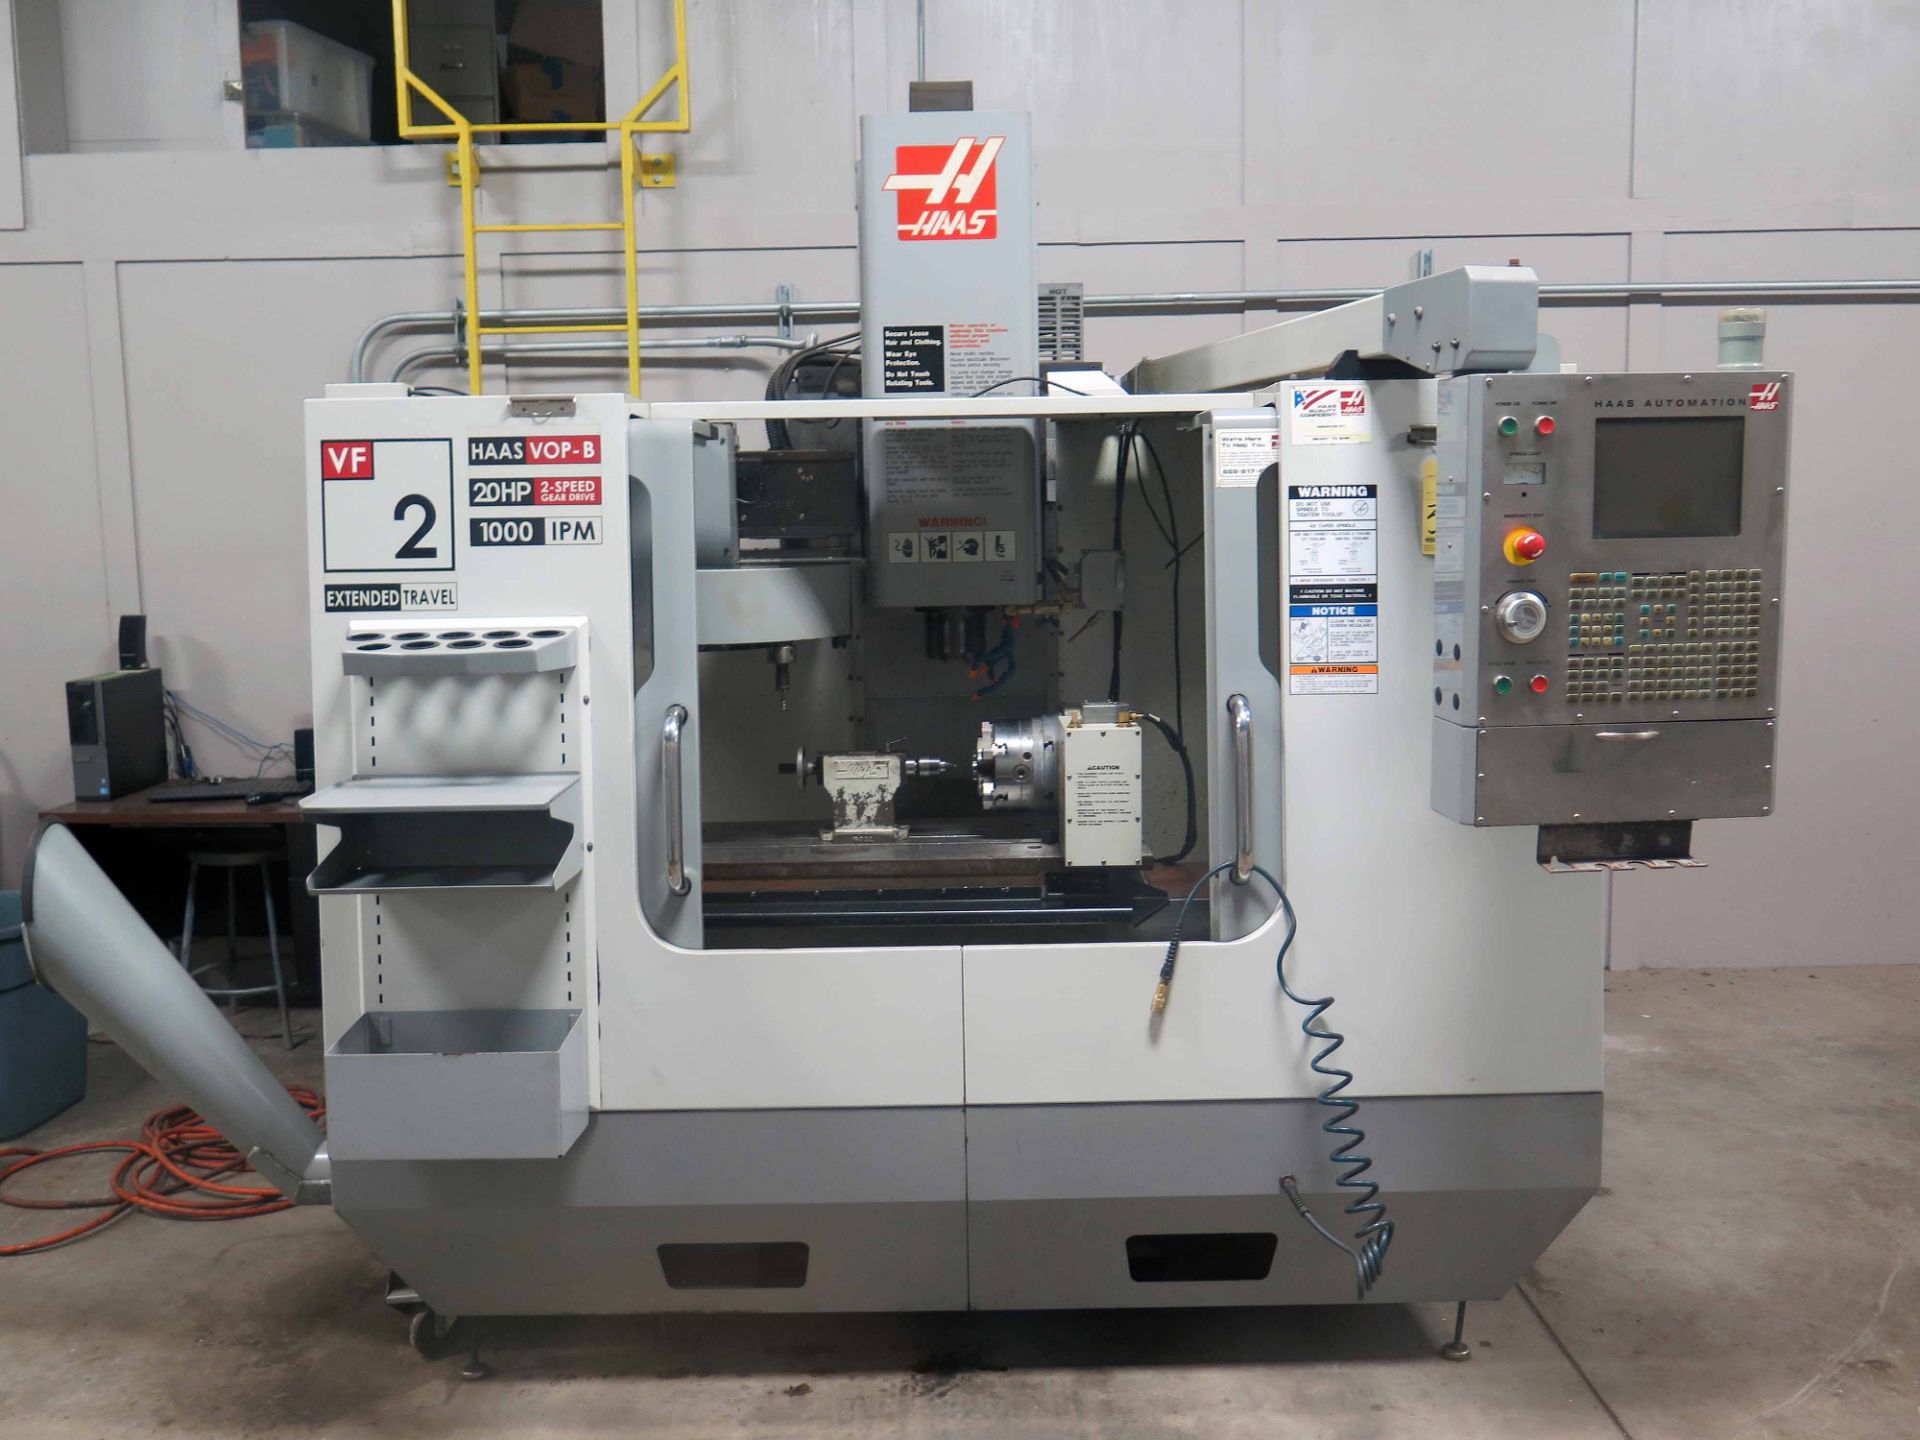 CNC VERTICAL MACHINING CENTER, HAAS MDL. VF-2BYT, new 2006, extended travel, Haas V0P-B CNC control,